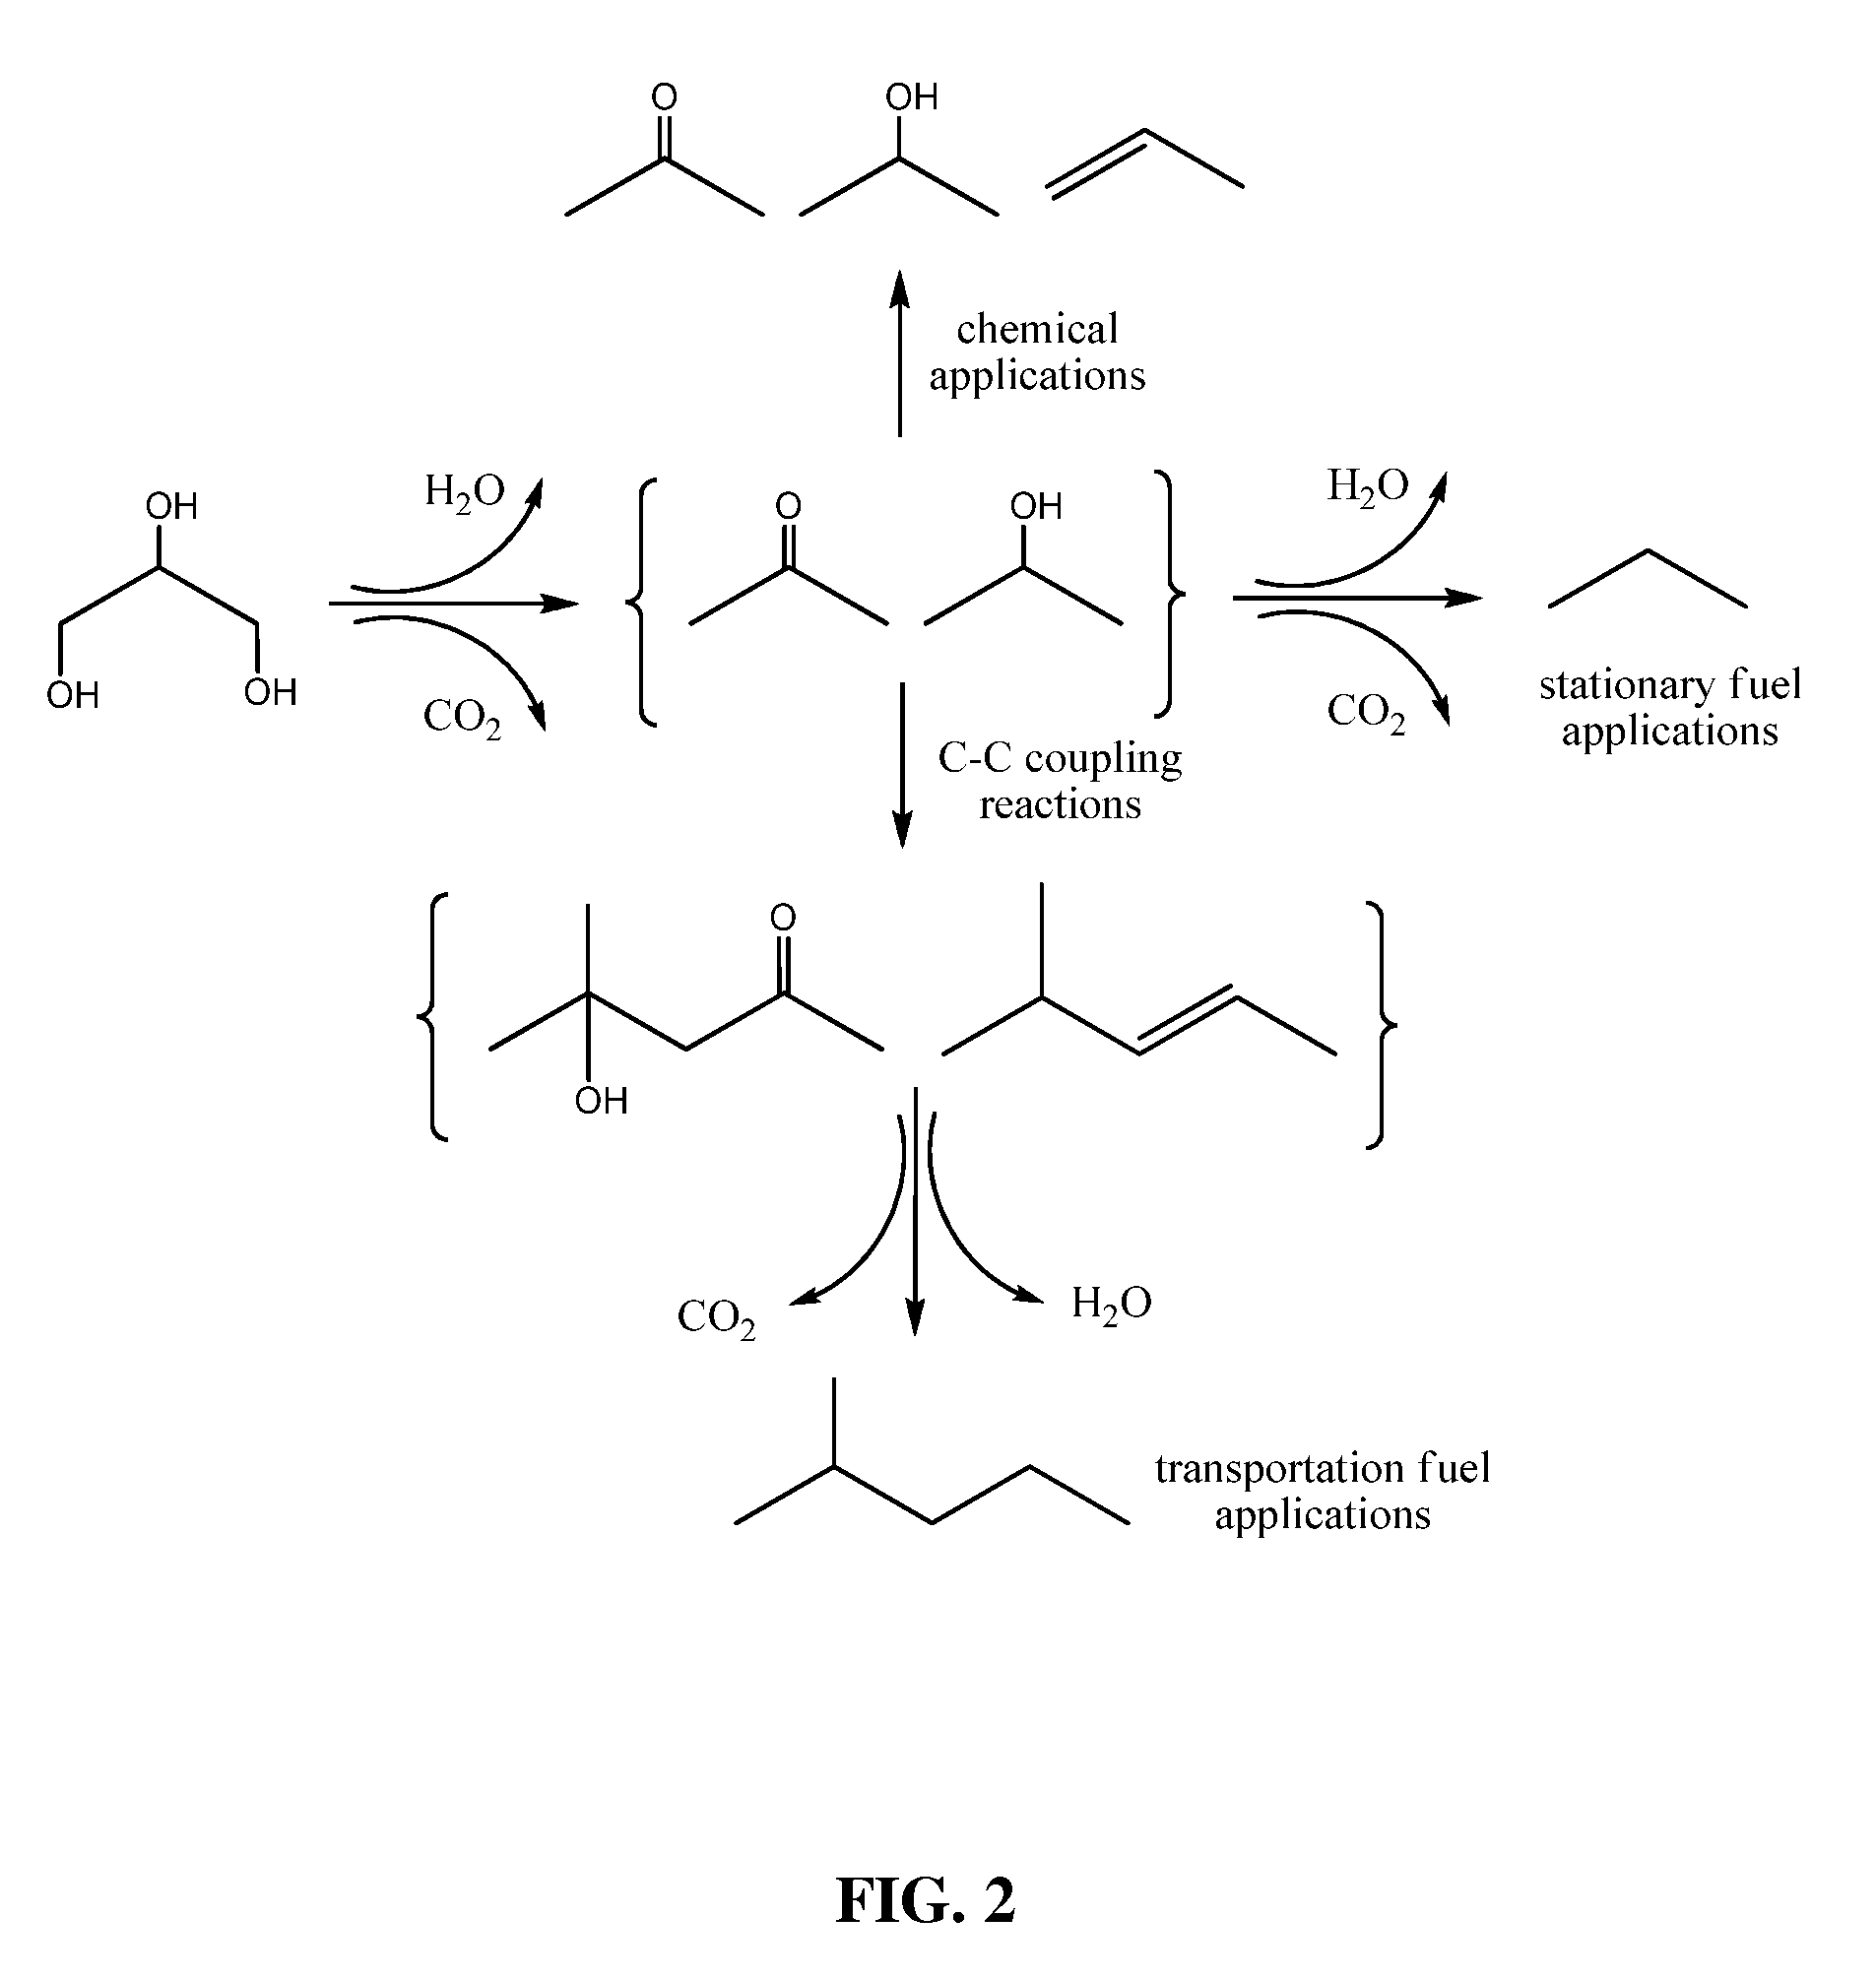 Single-reactor process for producing liquid-phase organic compounds from biomass